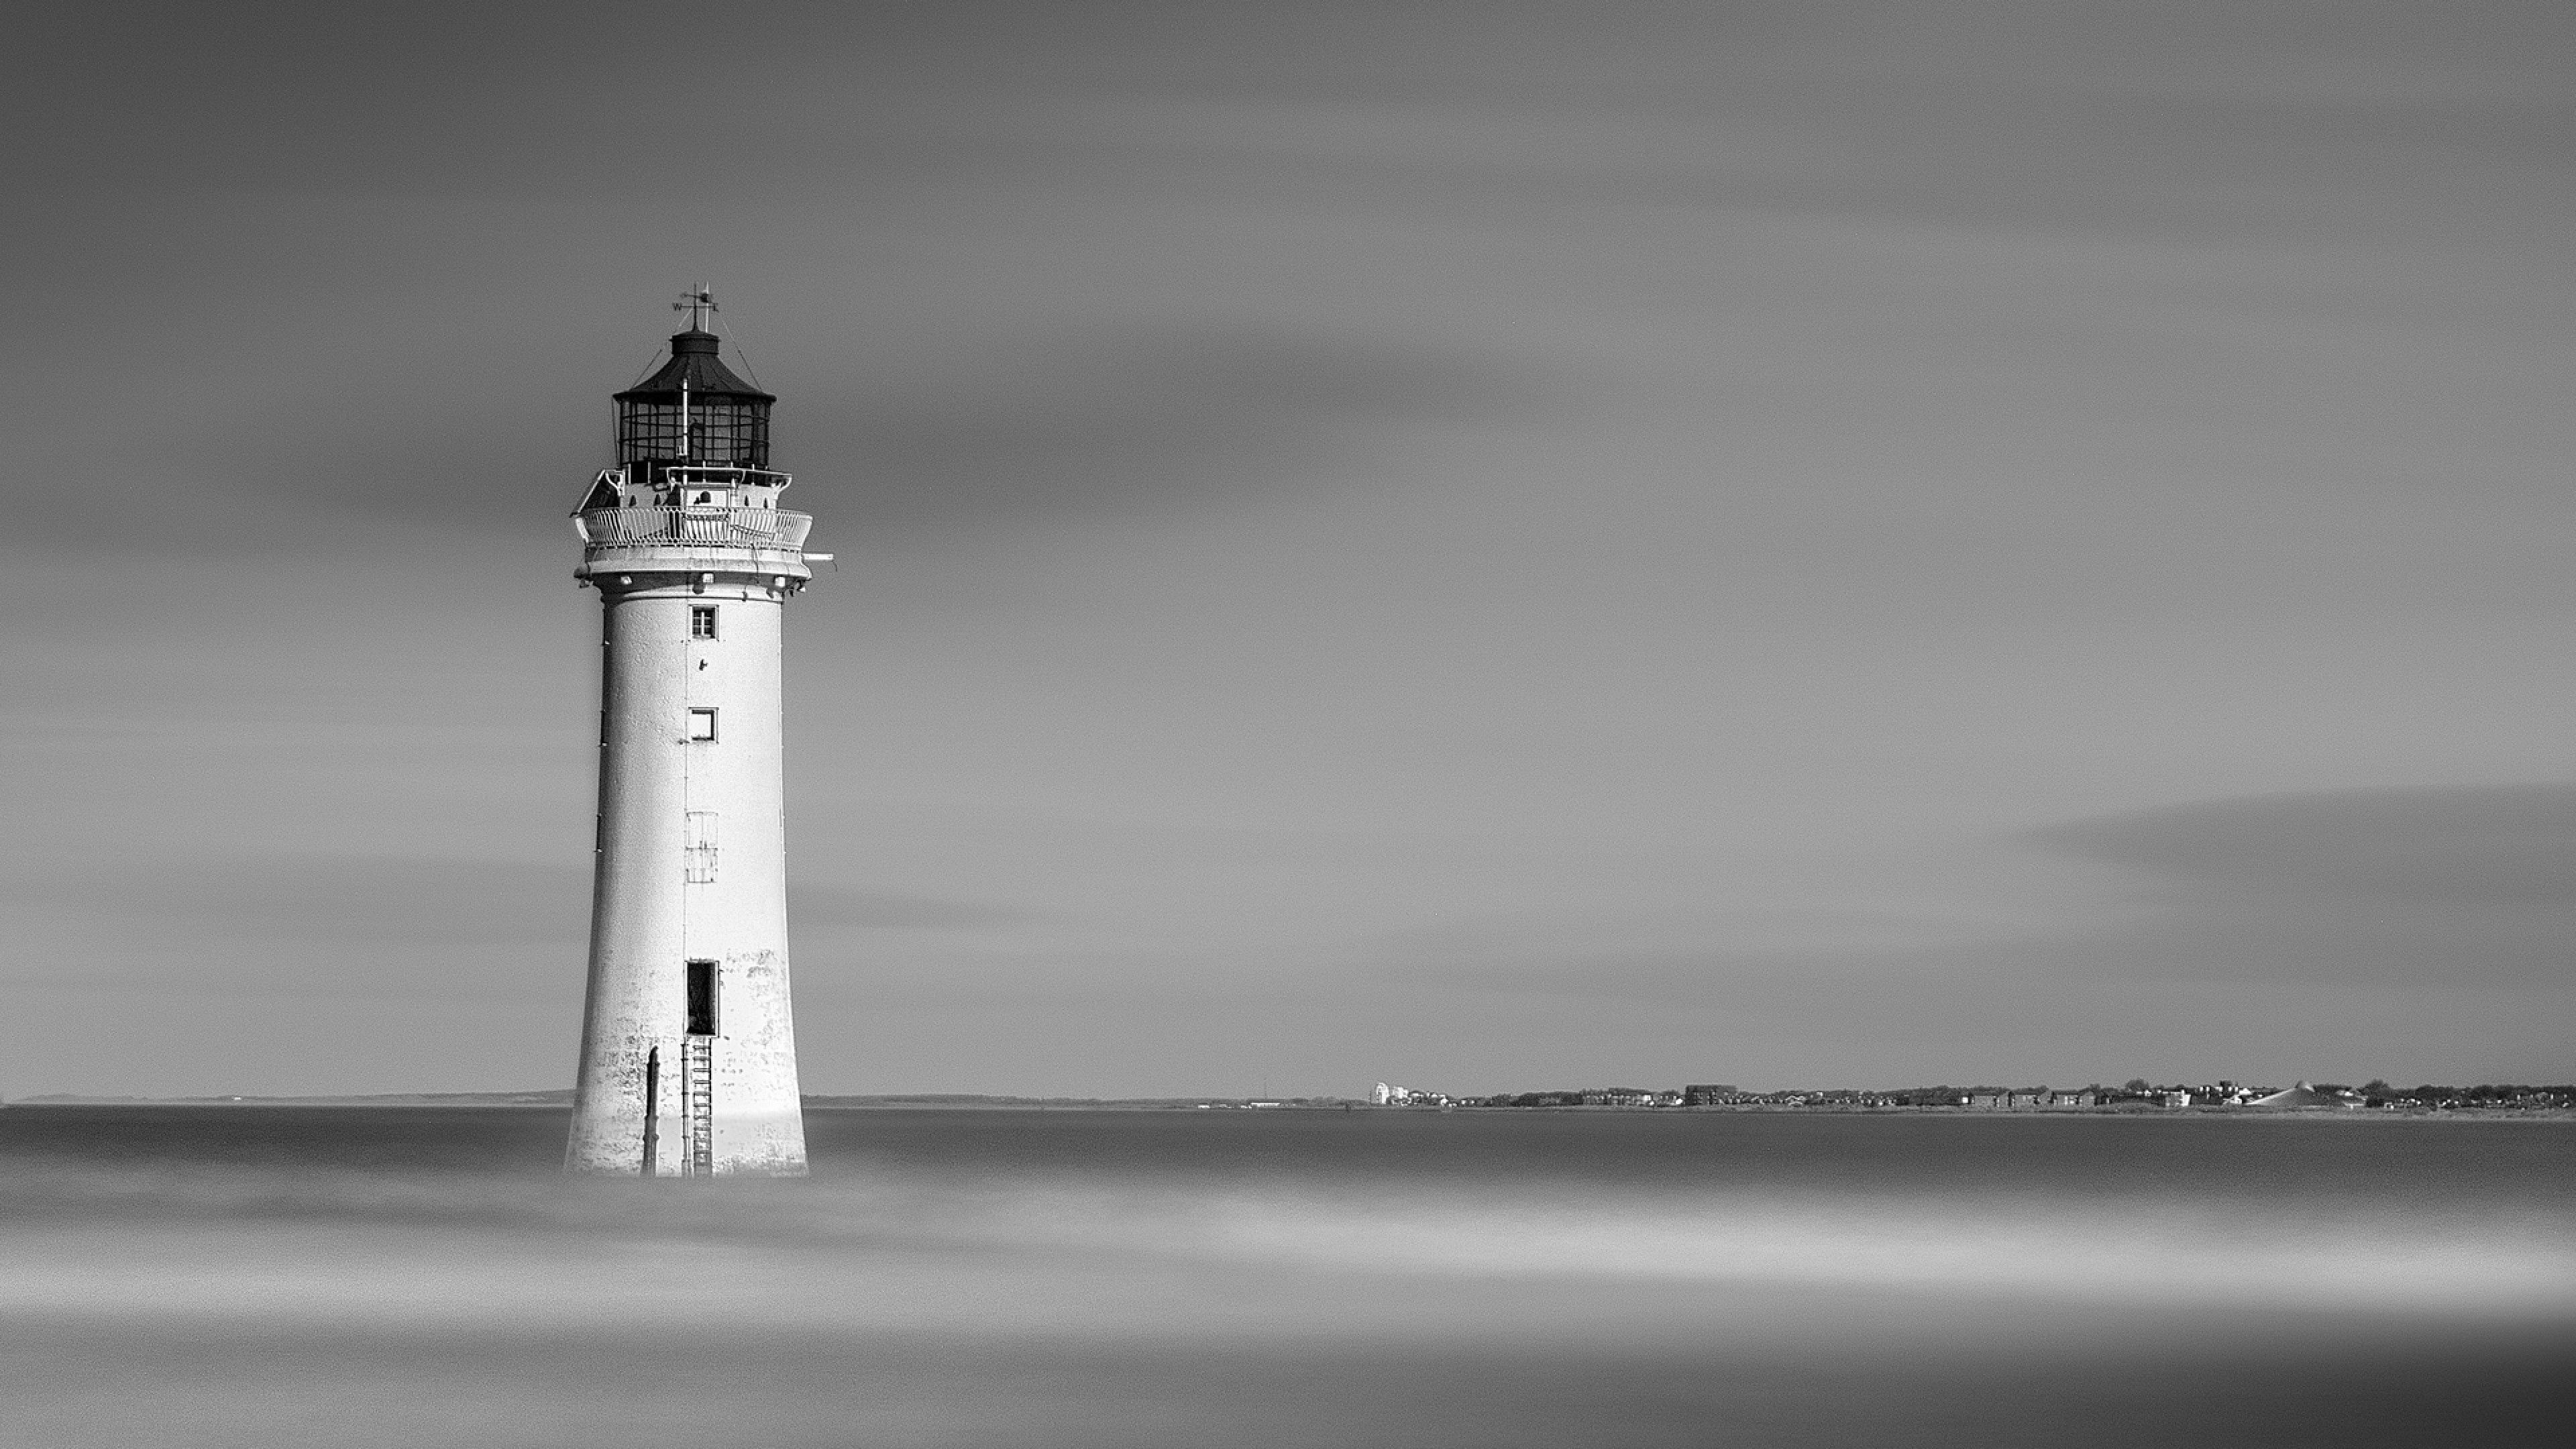 Lighthouse in the ocean HD Wallpaper available in different